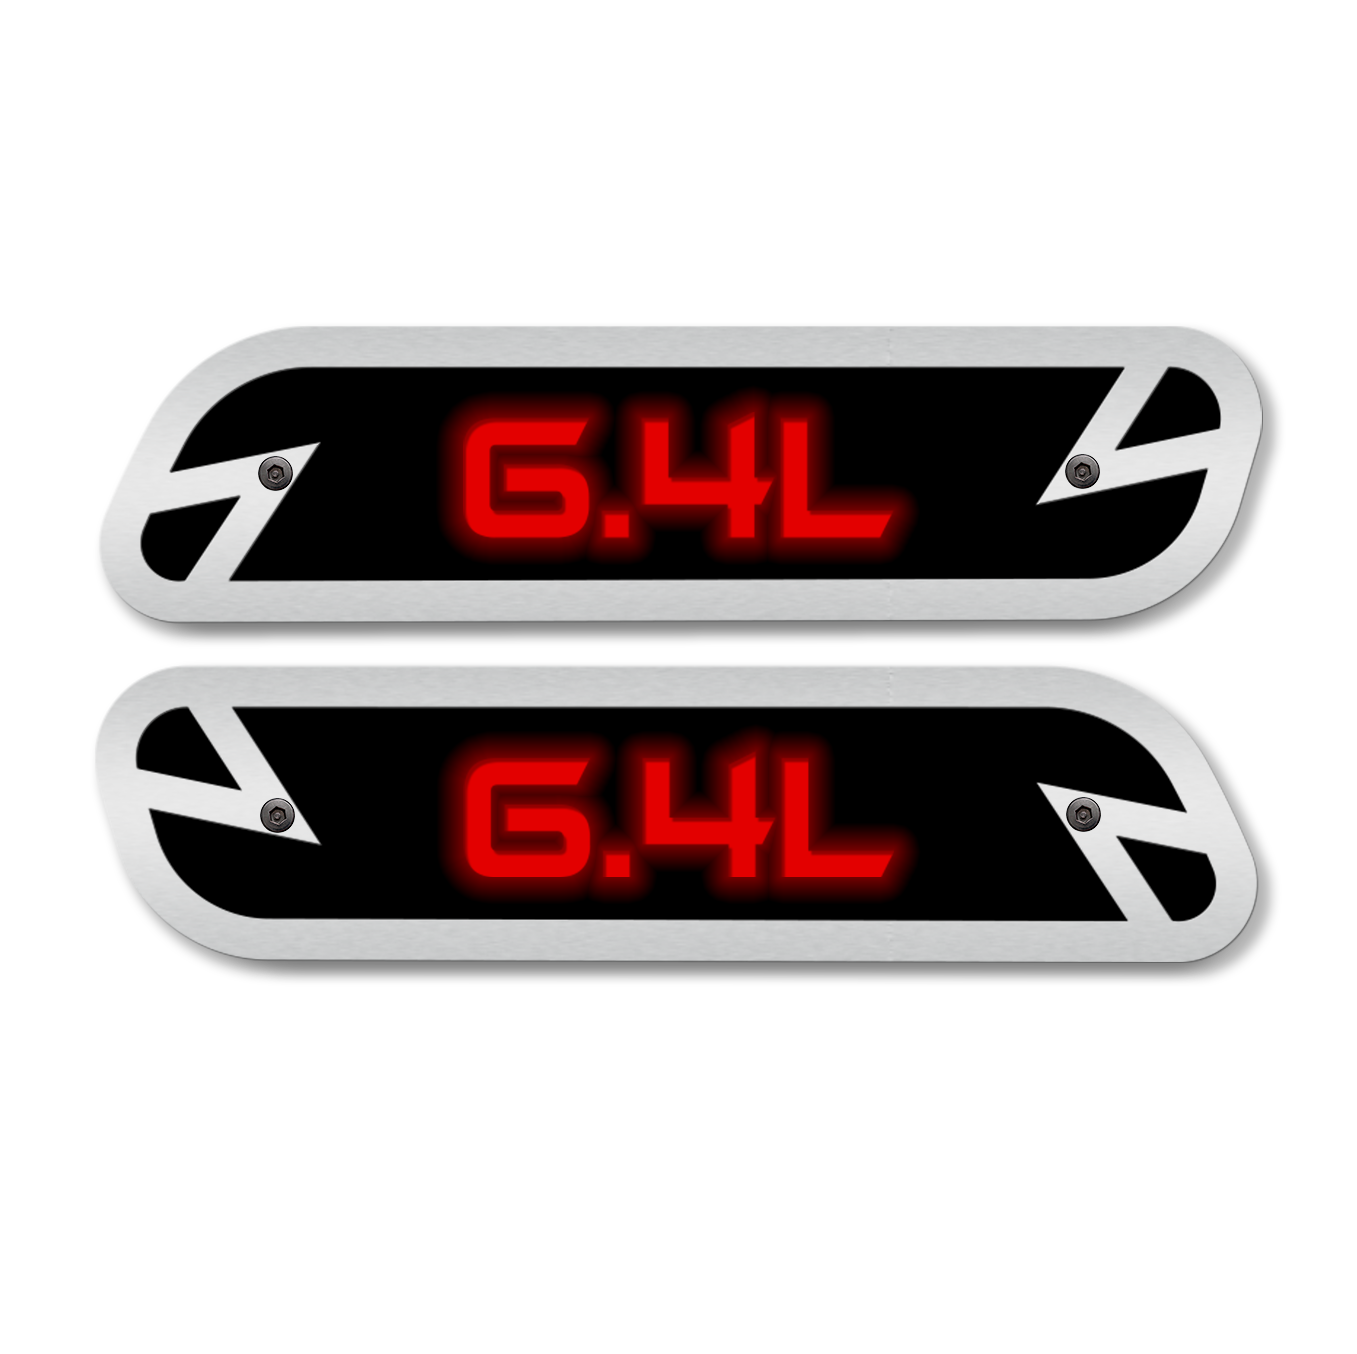 6.4L Hood Emblem Replacements - Fits 2019-2022 Ram® 2500, 3500, 4500 - Fully Customizable, LED or Non-LED